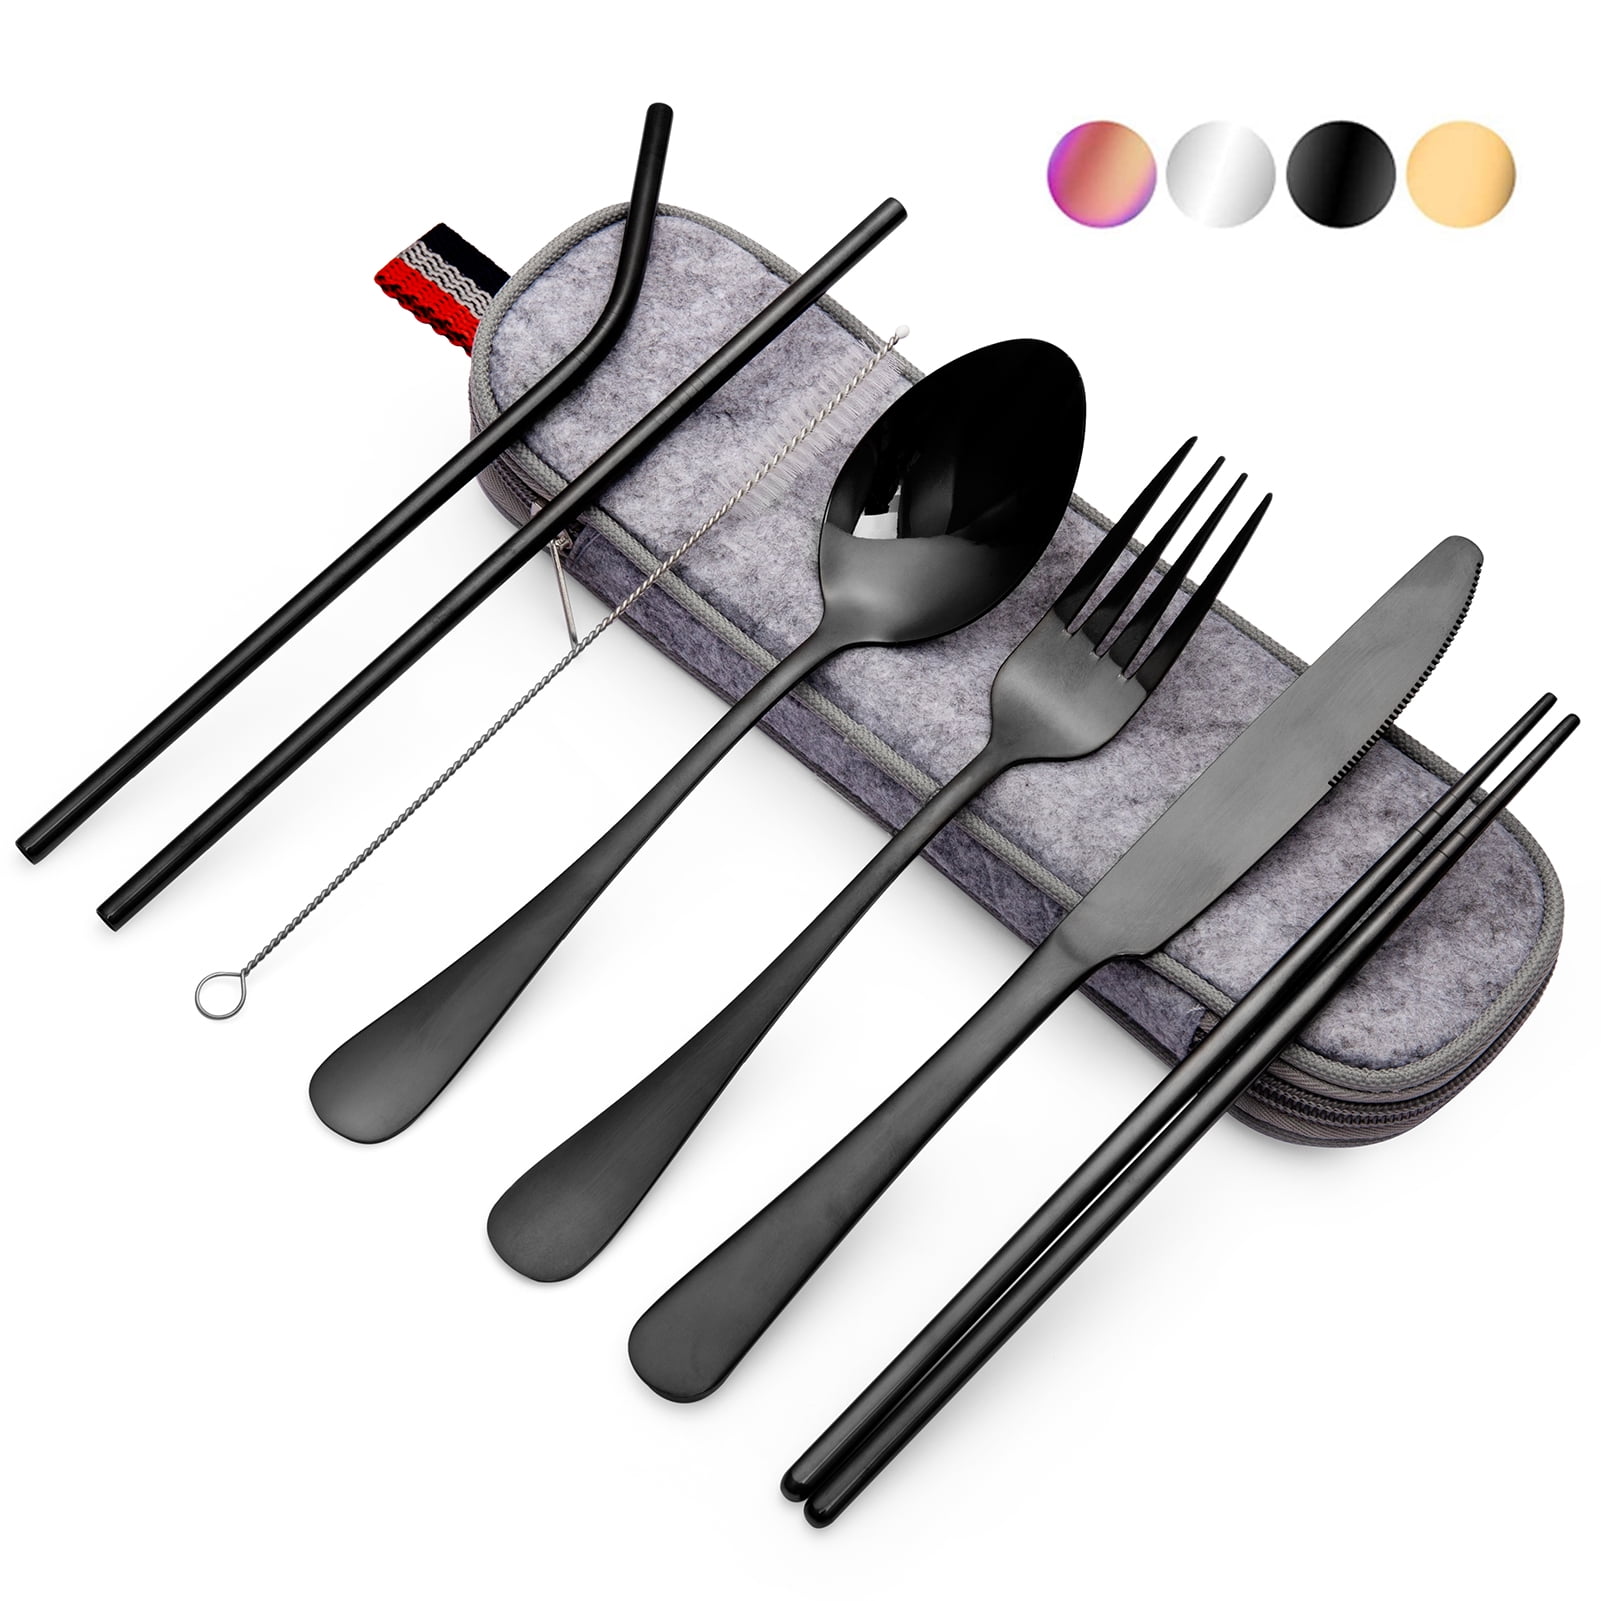 Travel Utensil Flatware Set, Portable Cutlery Set for Travel, School, Work,  Camping, Includes Stainless Steel Spoon, Fork, Knife and Silicone Carrying